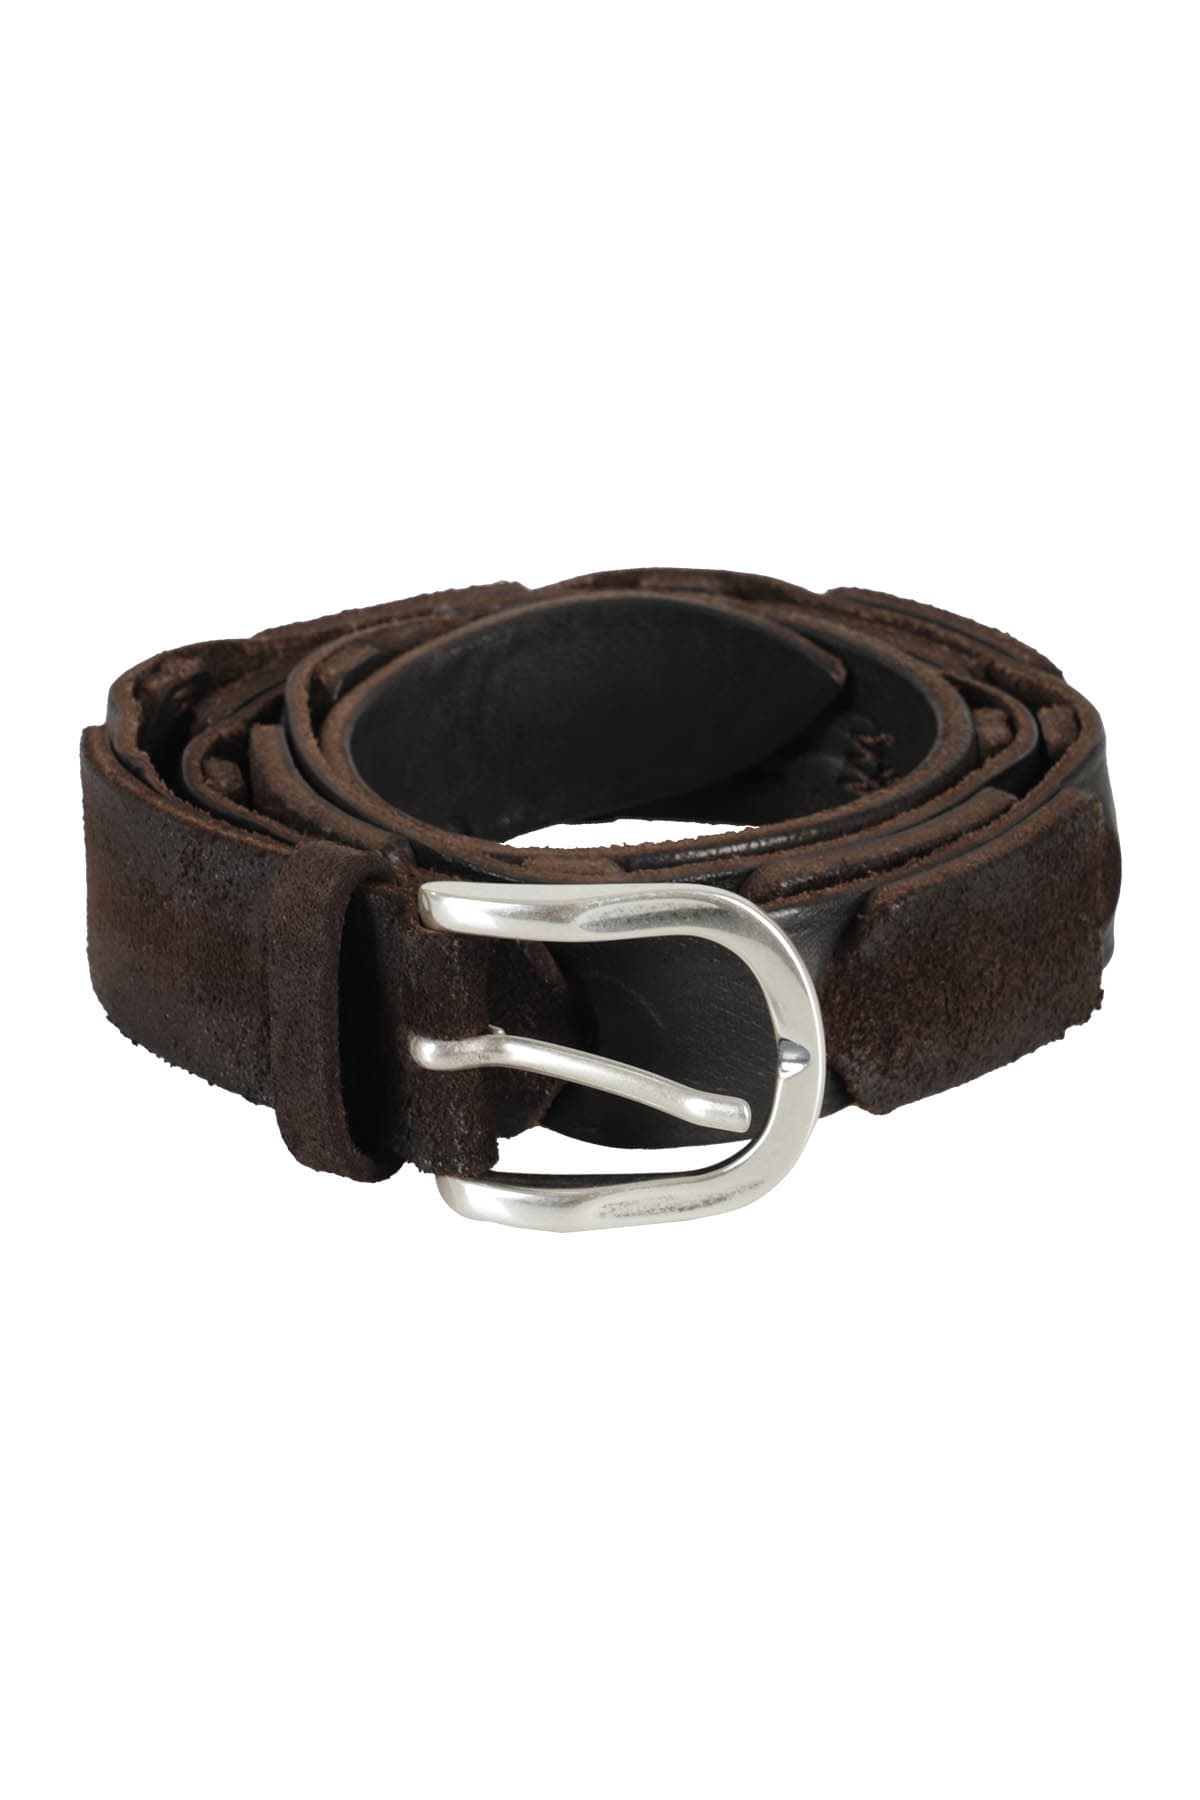 Orciani Leather Belt In T Moro